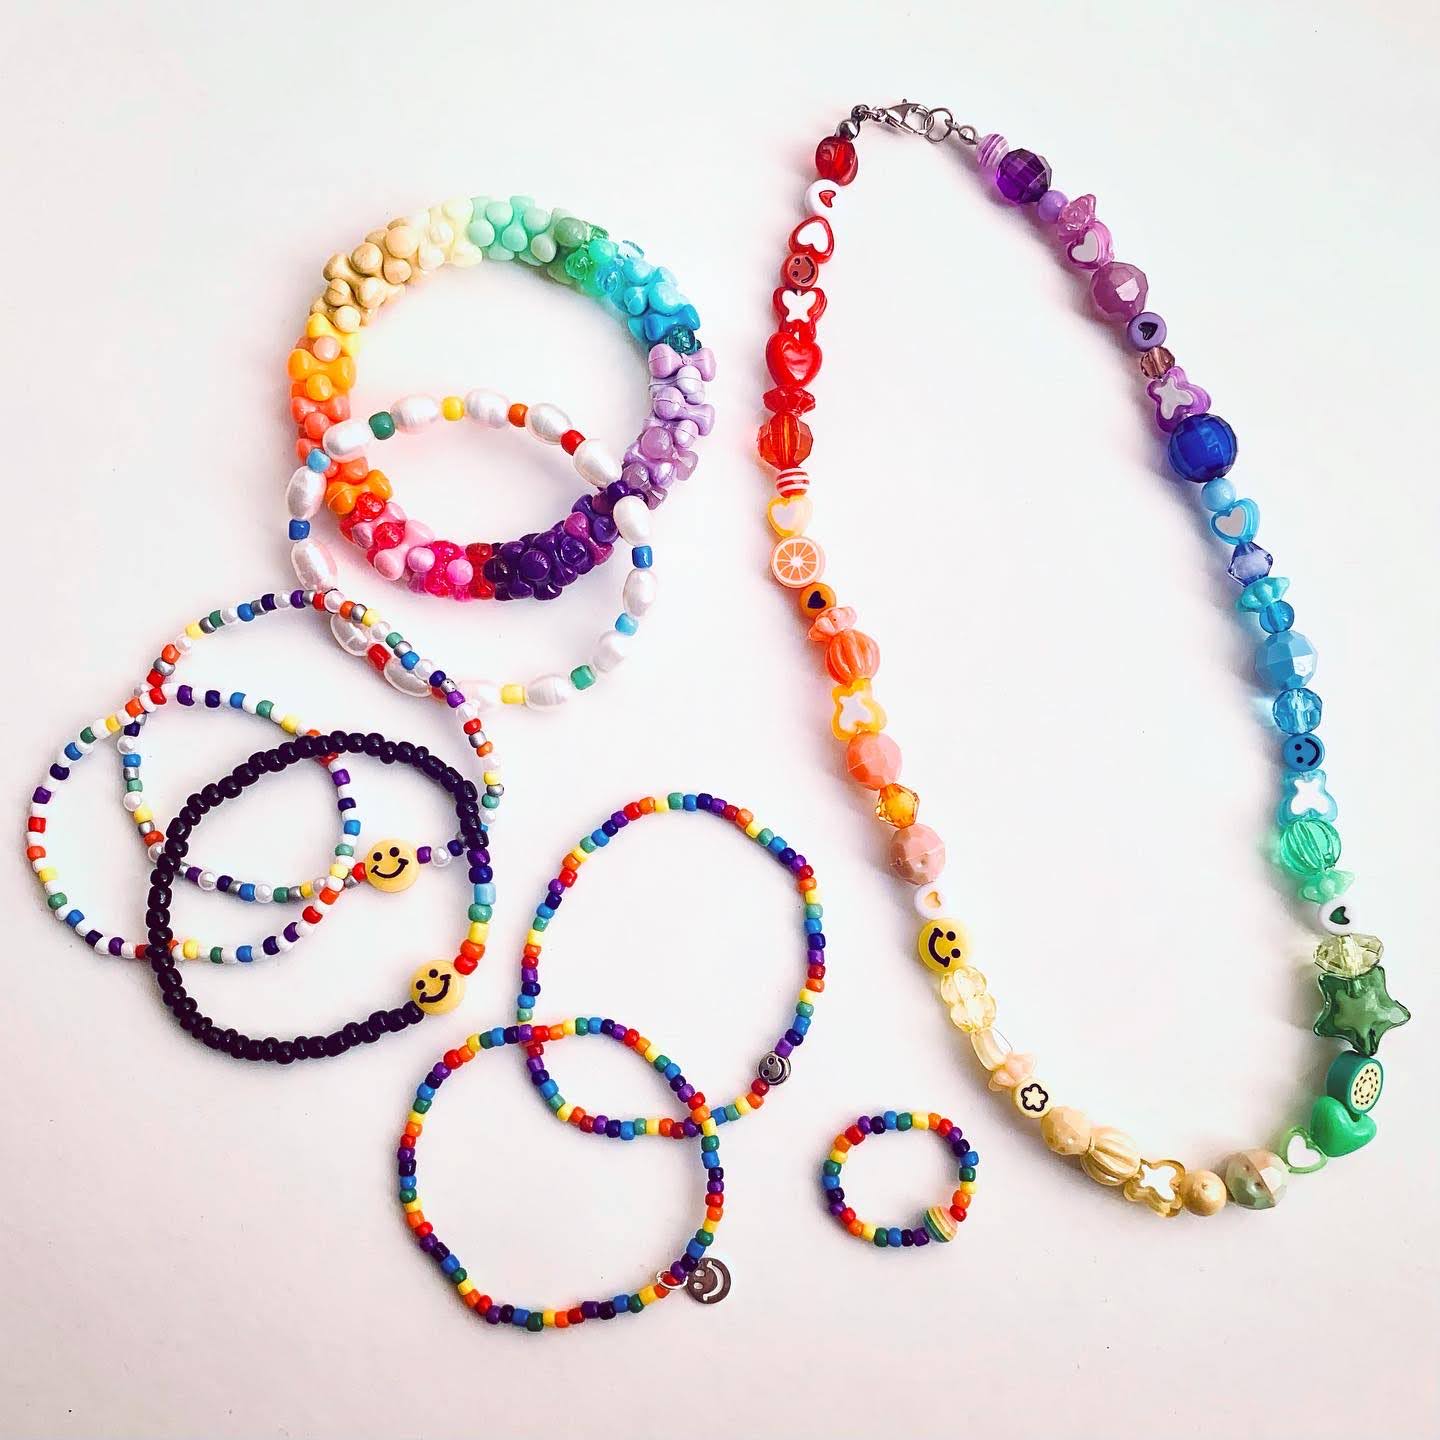 Rainbow Jelly Bean Bead Necklace — Lost Objects, Found Treasures